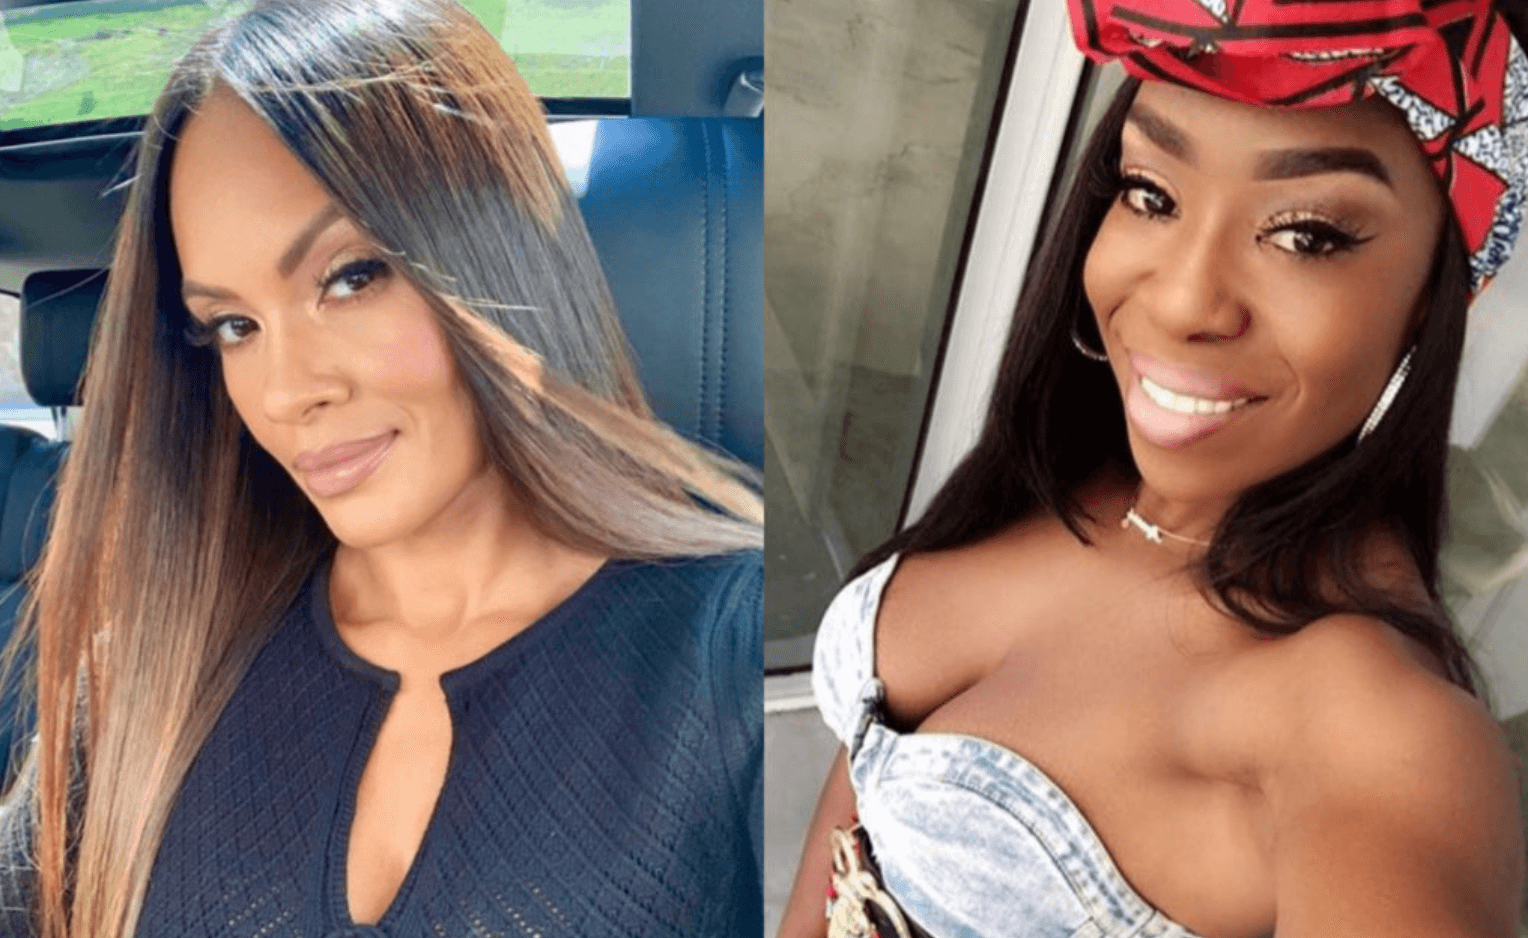 OG Reveals Why She Returned To 'Basketball Wives' Amid Lawsuit Drama